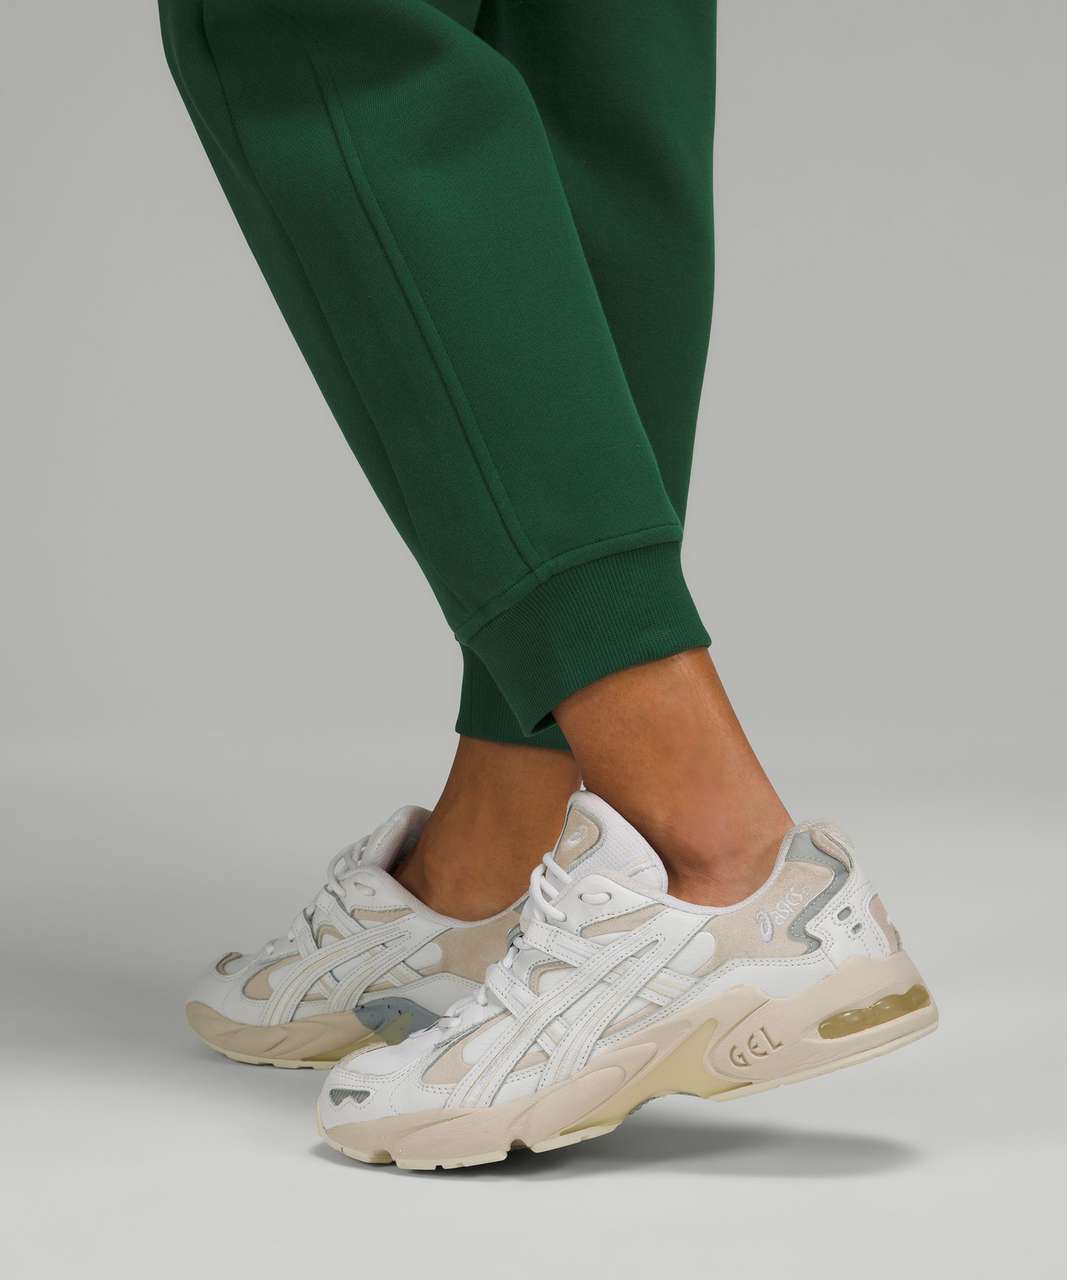 Need help sizing for scuba high rise joggers plz!!🥲I am a size 6/8 in  align leggings and wunder unders. I recently bought a pair of hrsj in a size  6 and they